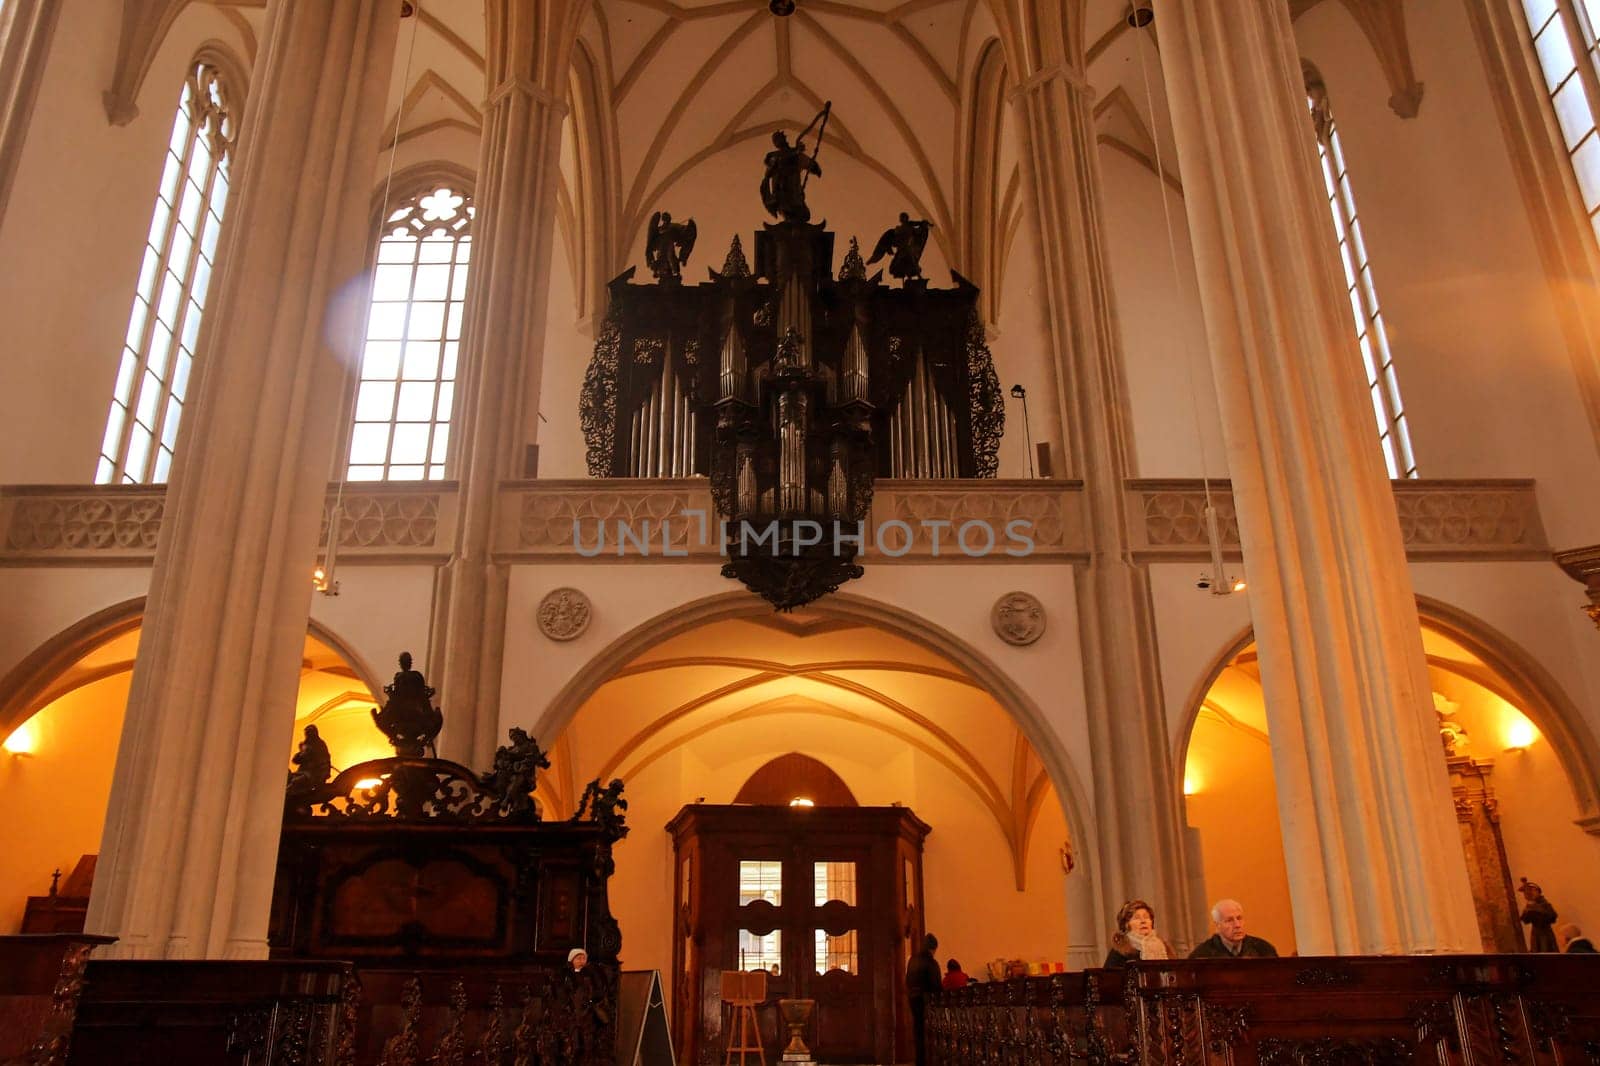 The Church of St. Jacob the Elder is a late Gothic three-nave hall church located on the Jakub Square in the Brno by roman_nerud